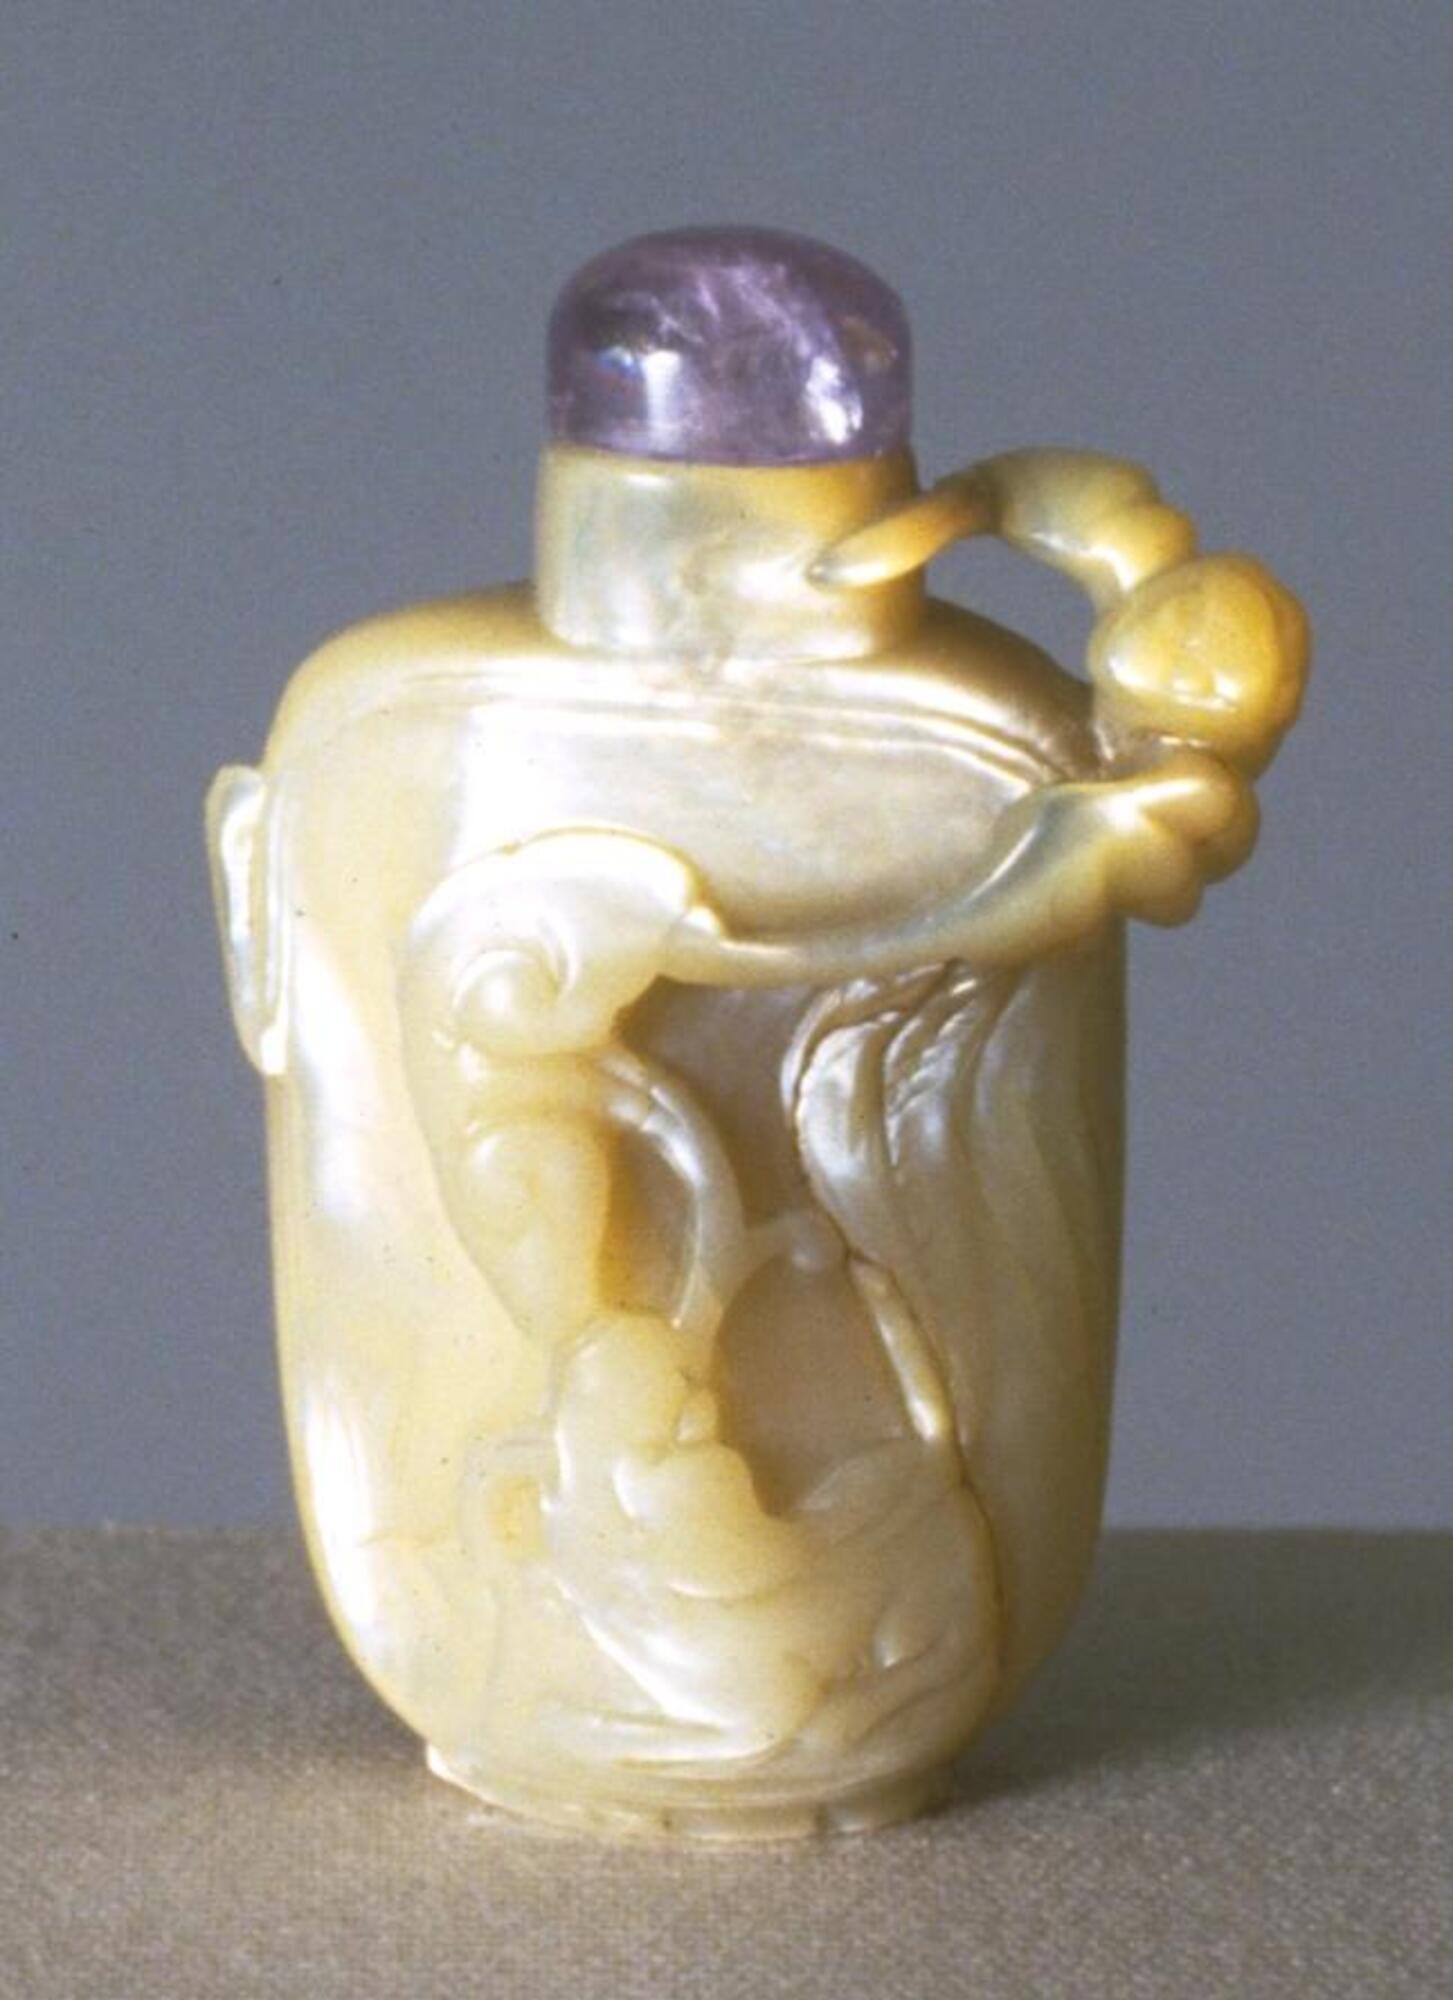 A mother of pearl snuff bottle carved with organic designs. On top of the snuff bottle is an amethyst stopper.